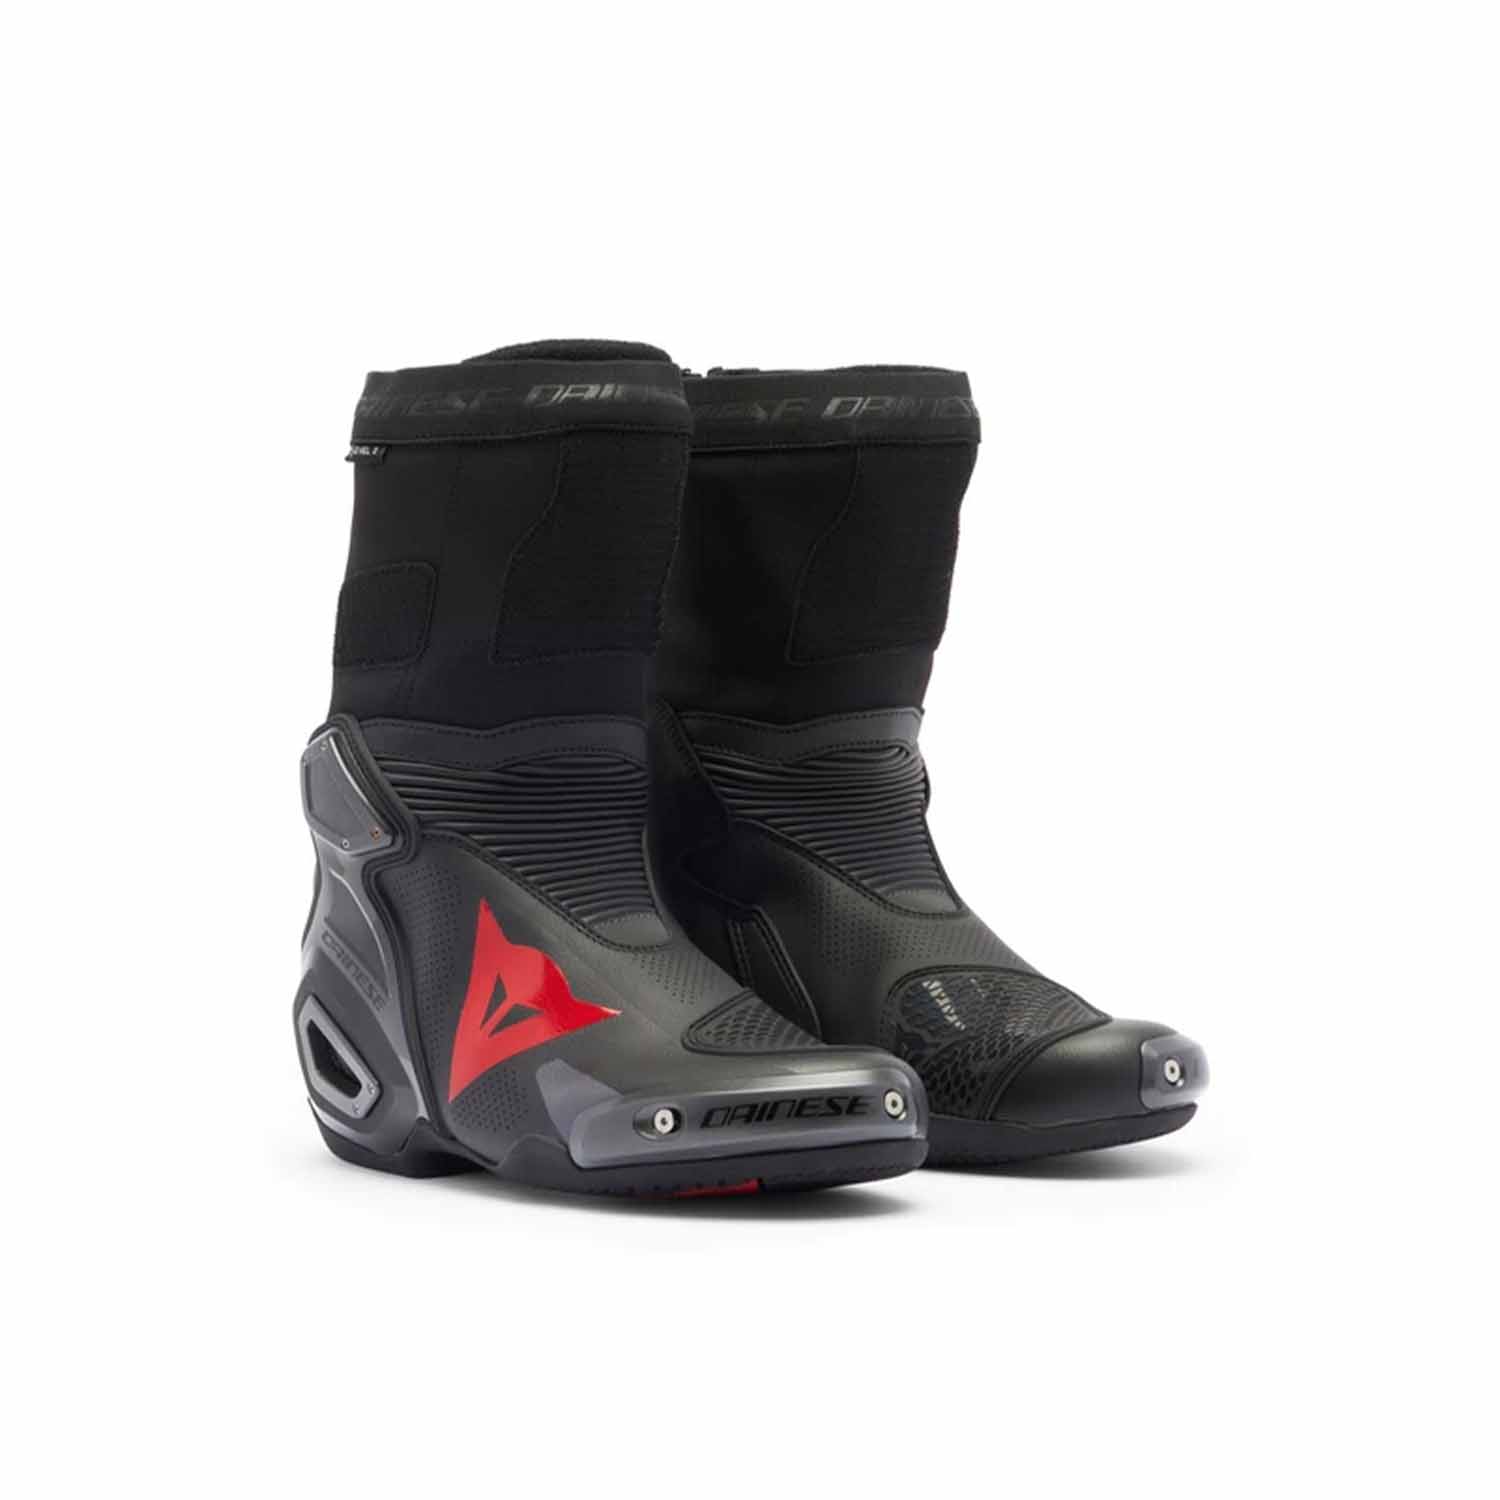 Image of Dainese Axial 2 Air Boots Black Red Fluo Size 42 EN